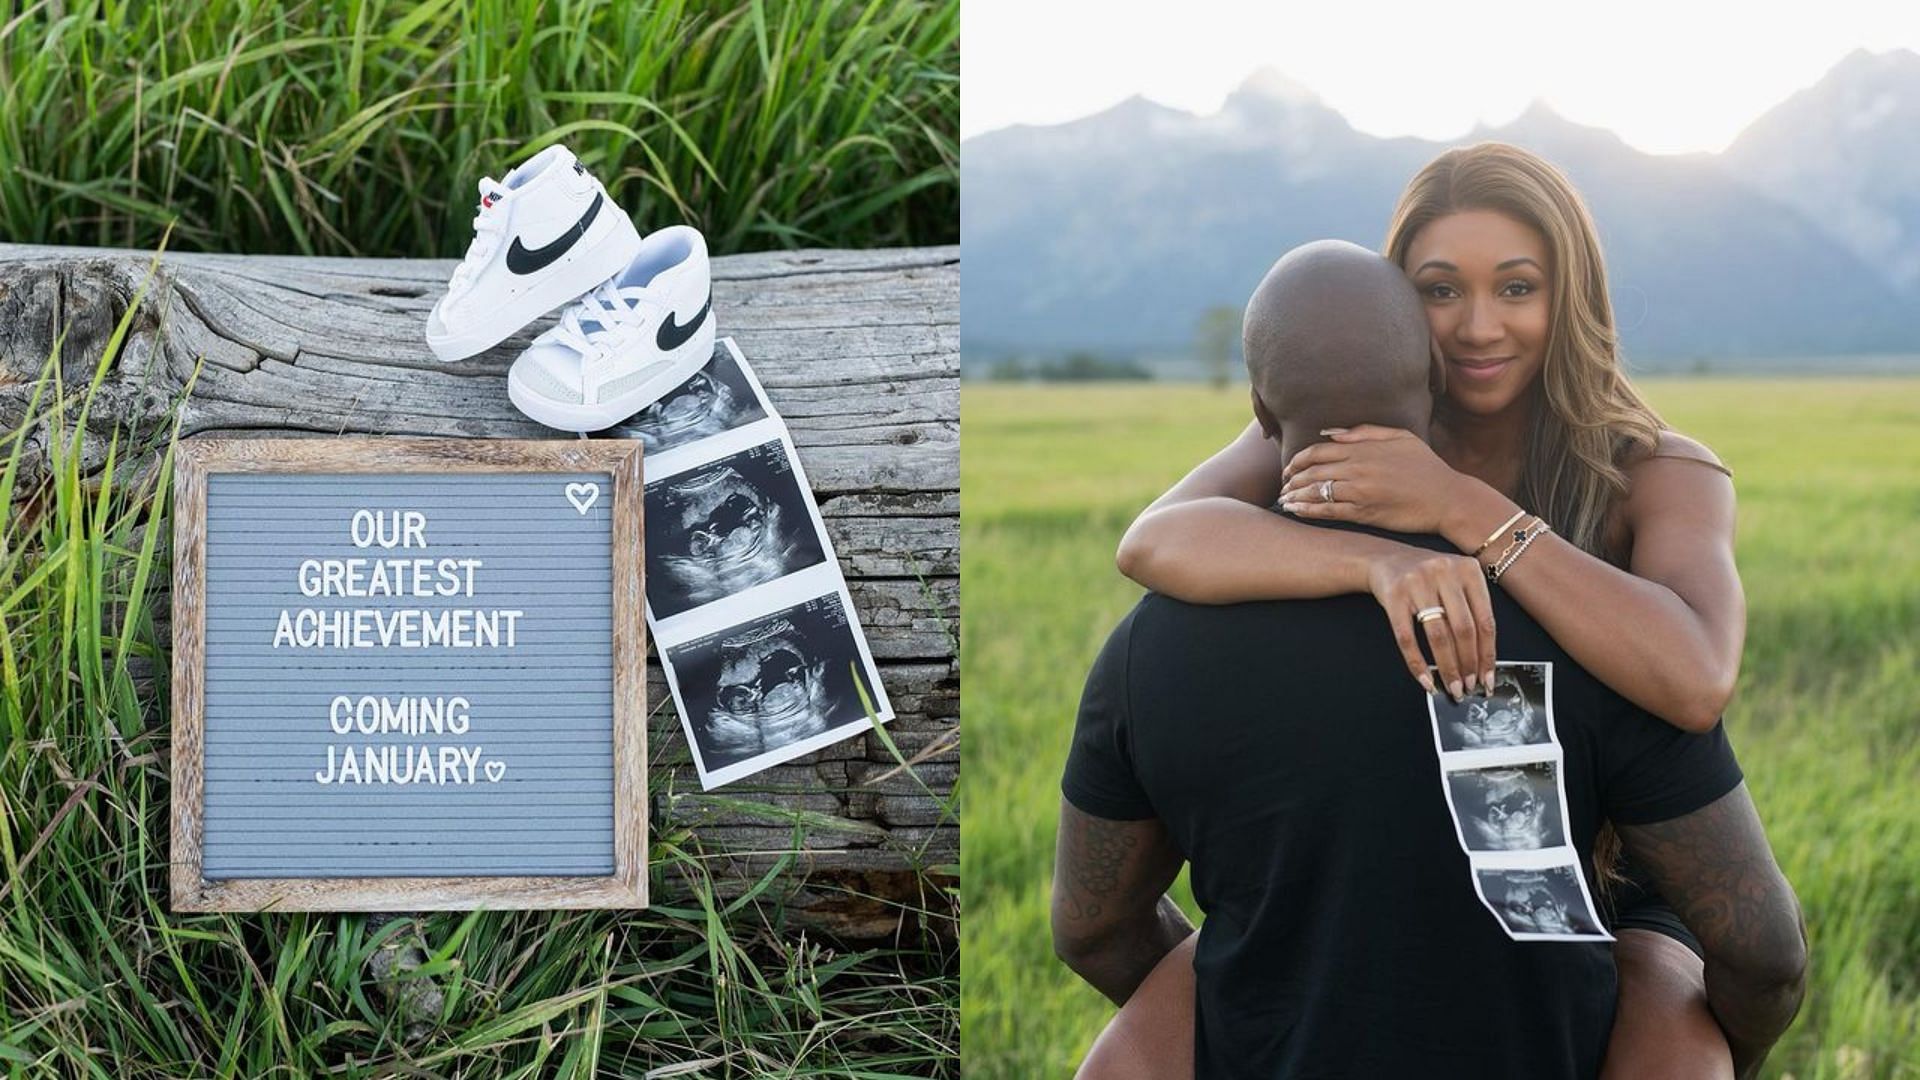 IN PHOTOS: NFL reporter Maria Taylor reveals first pregnancy in ...